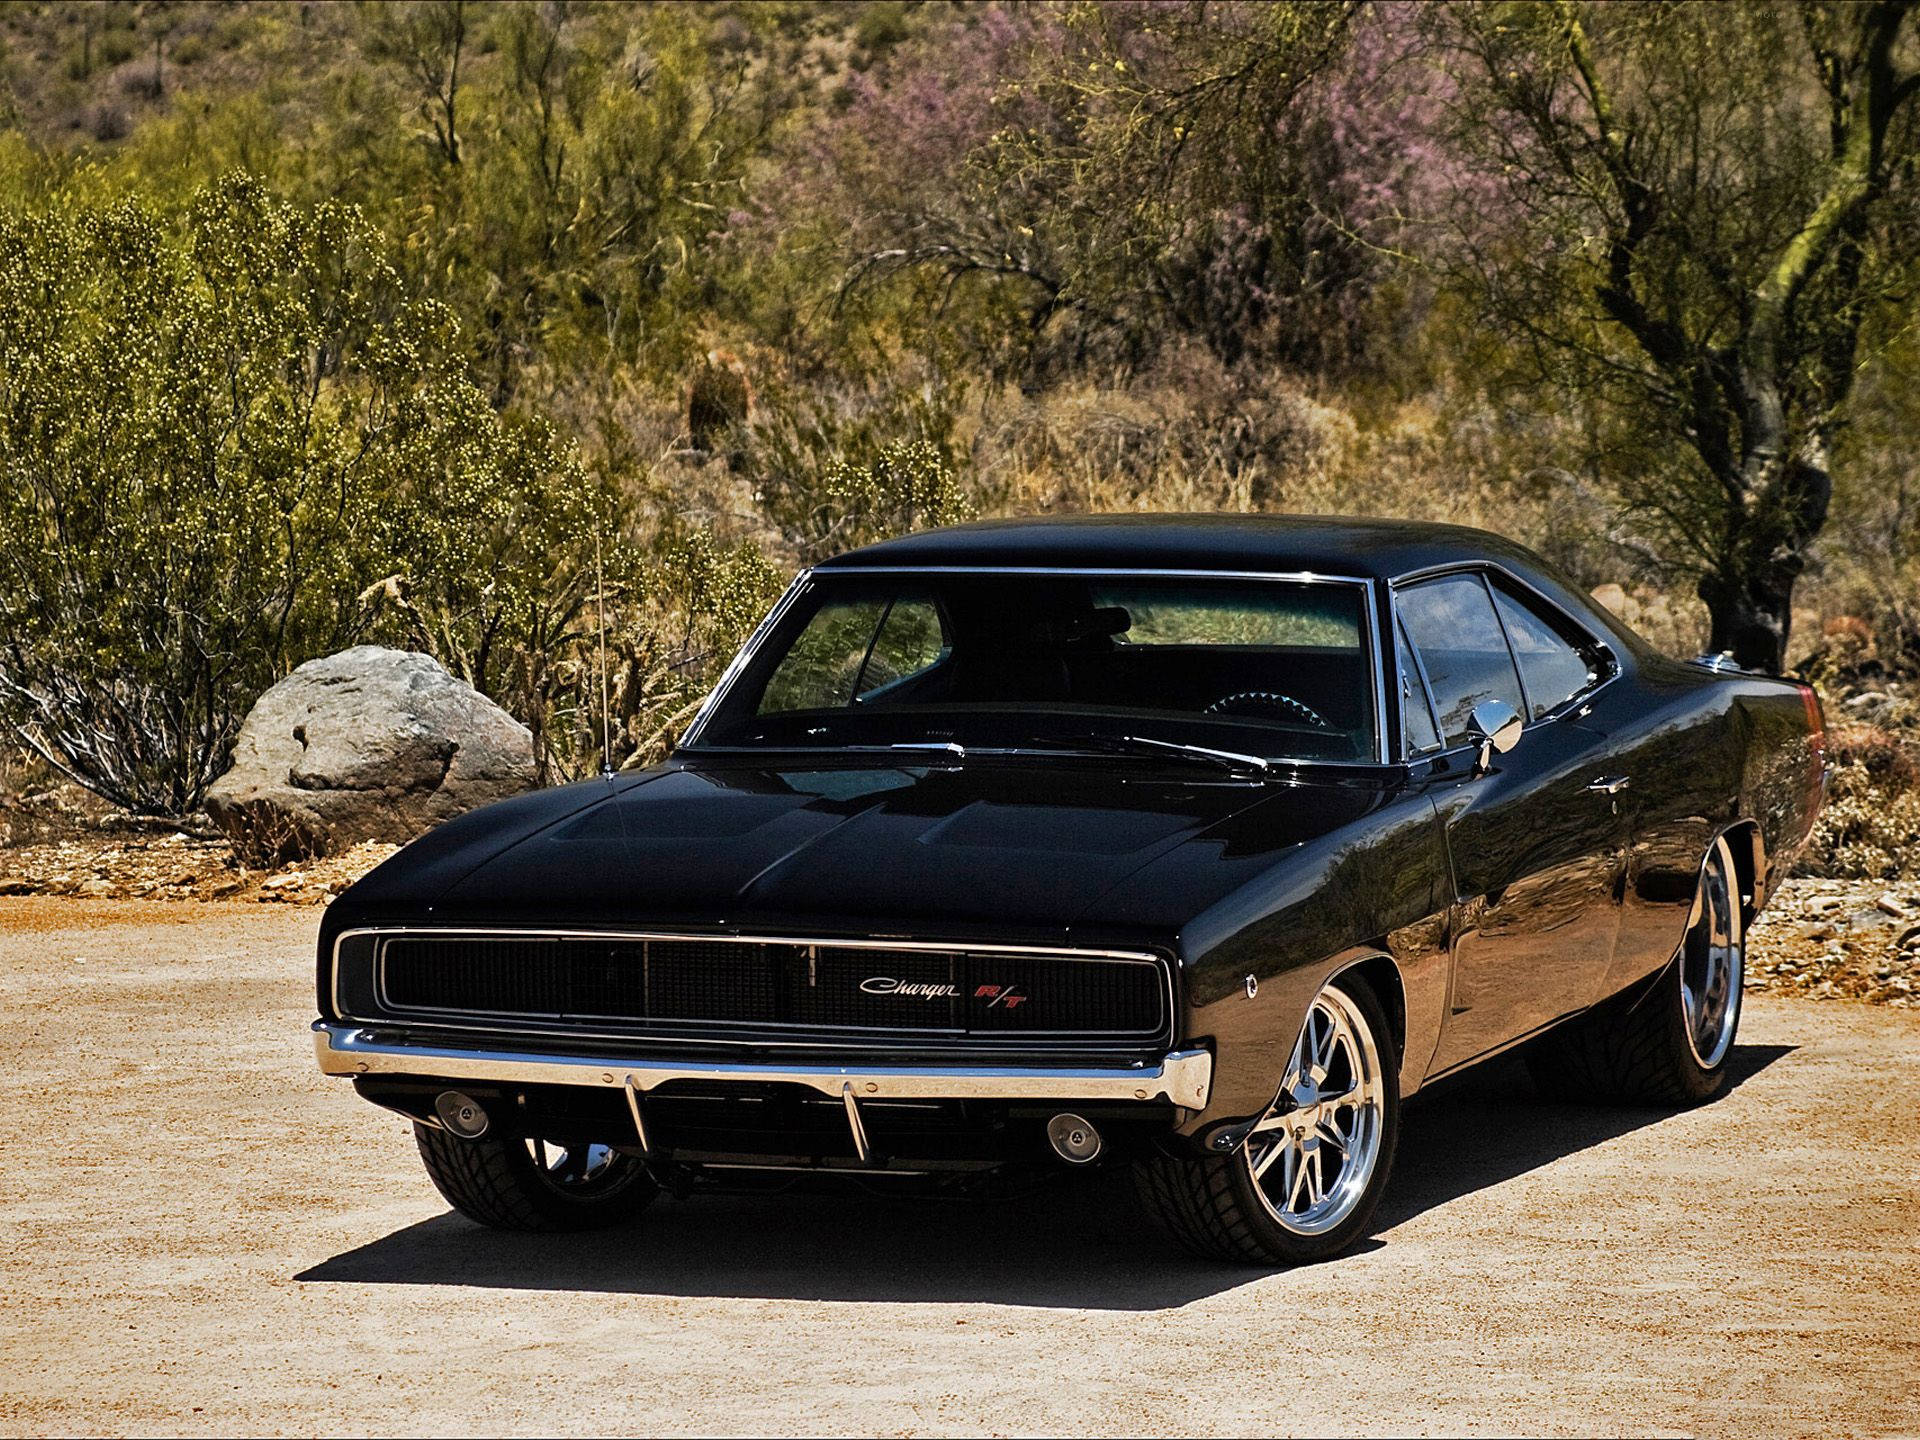 Caption: Majestic Dodge Charger R/T - The Iconic Muscle Car Wallpaper